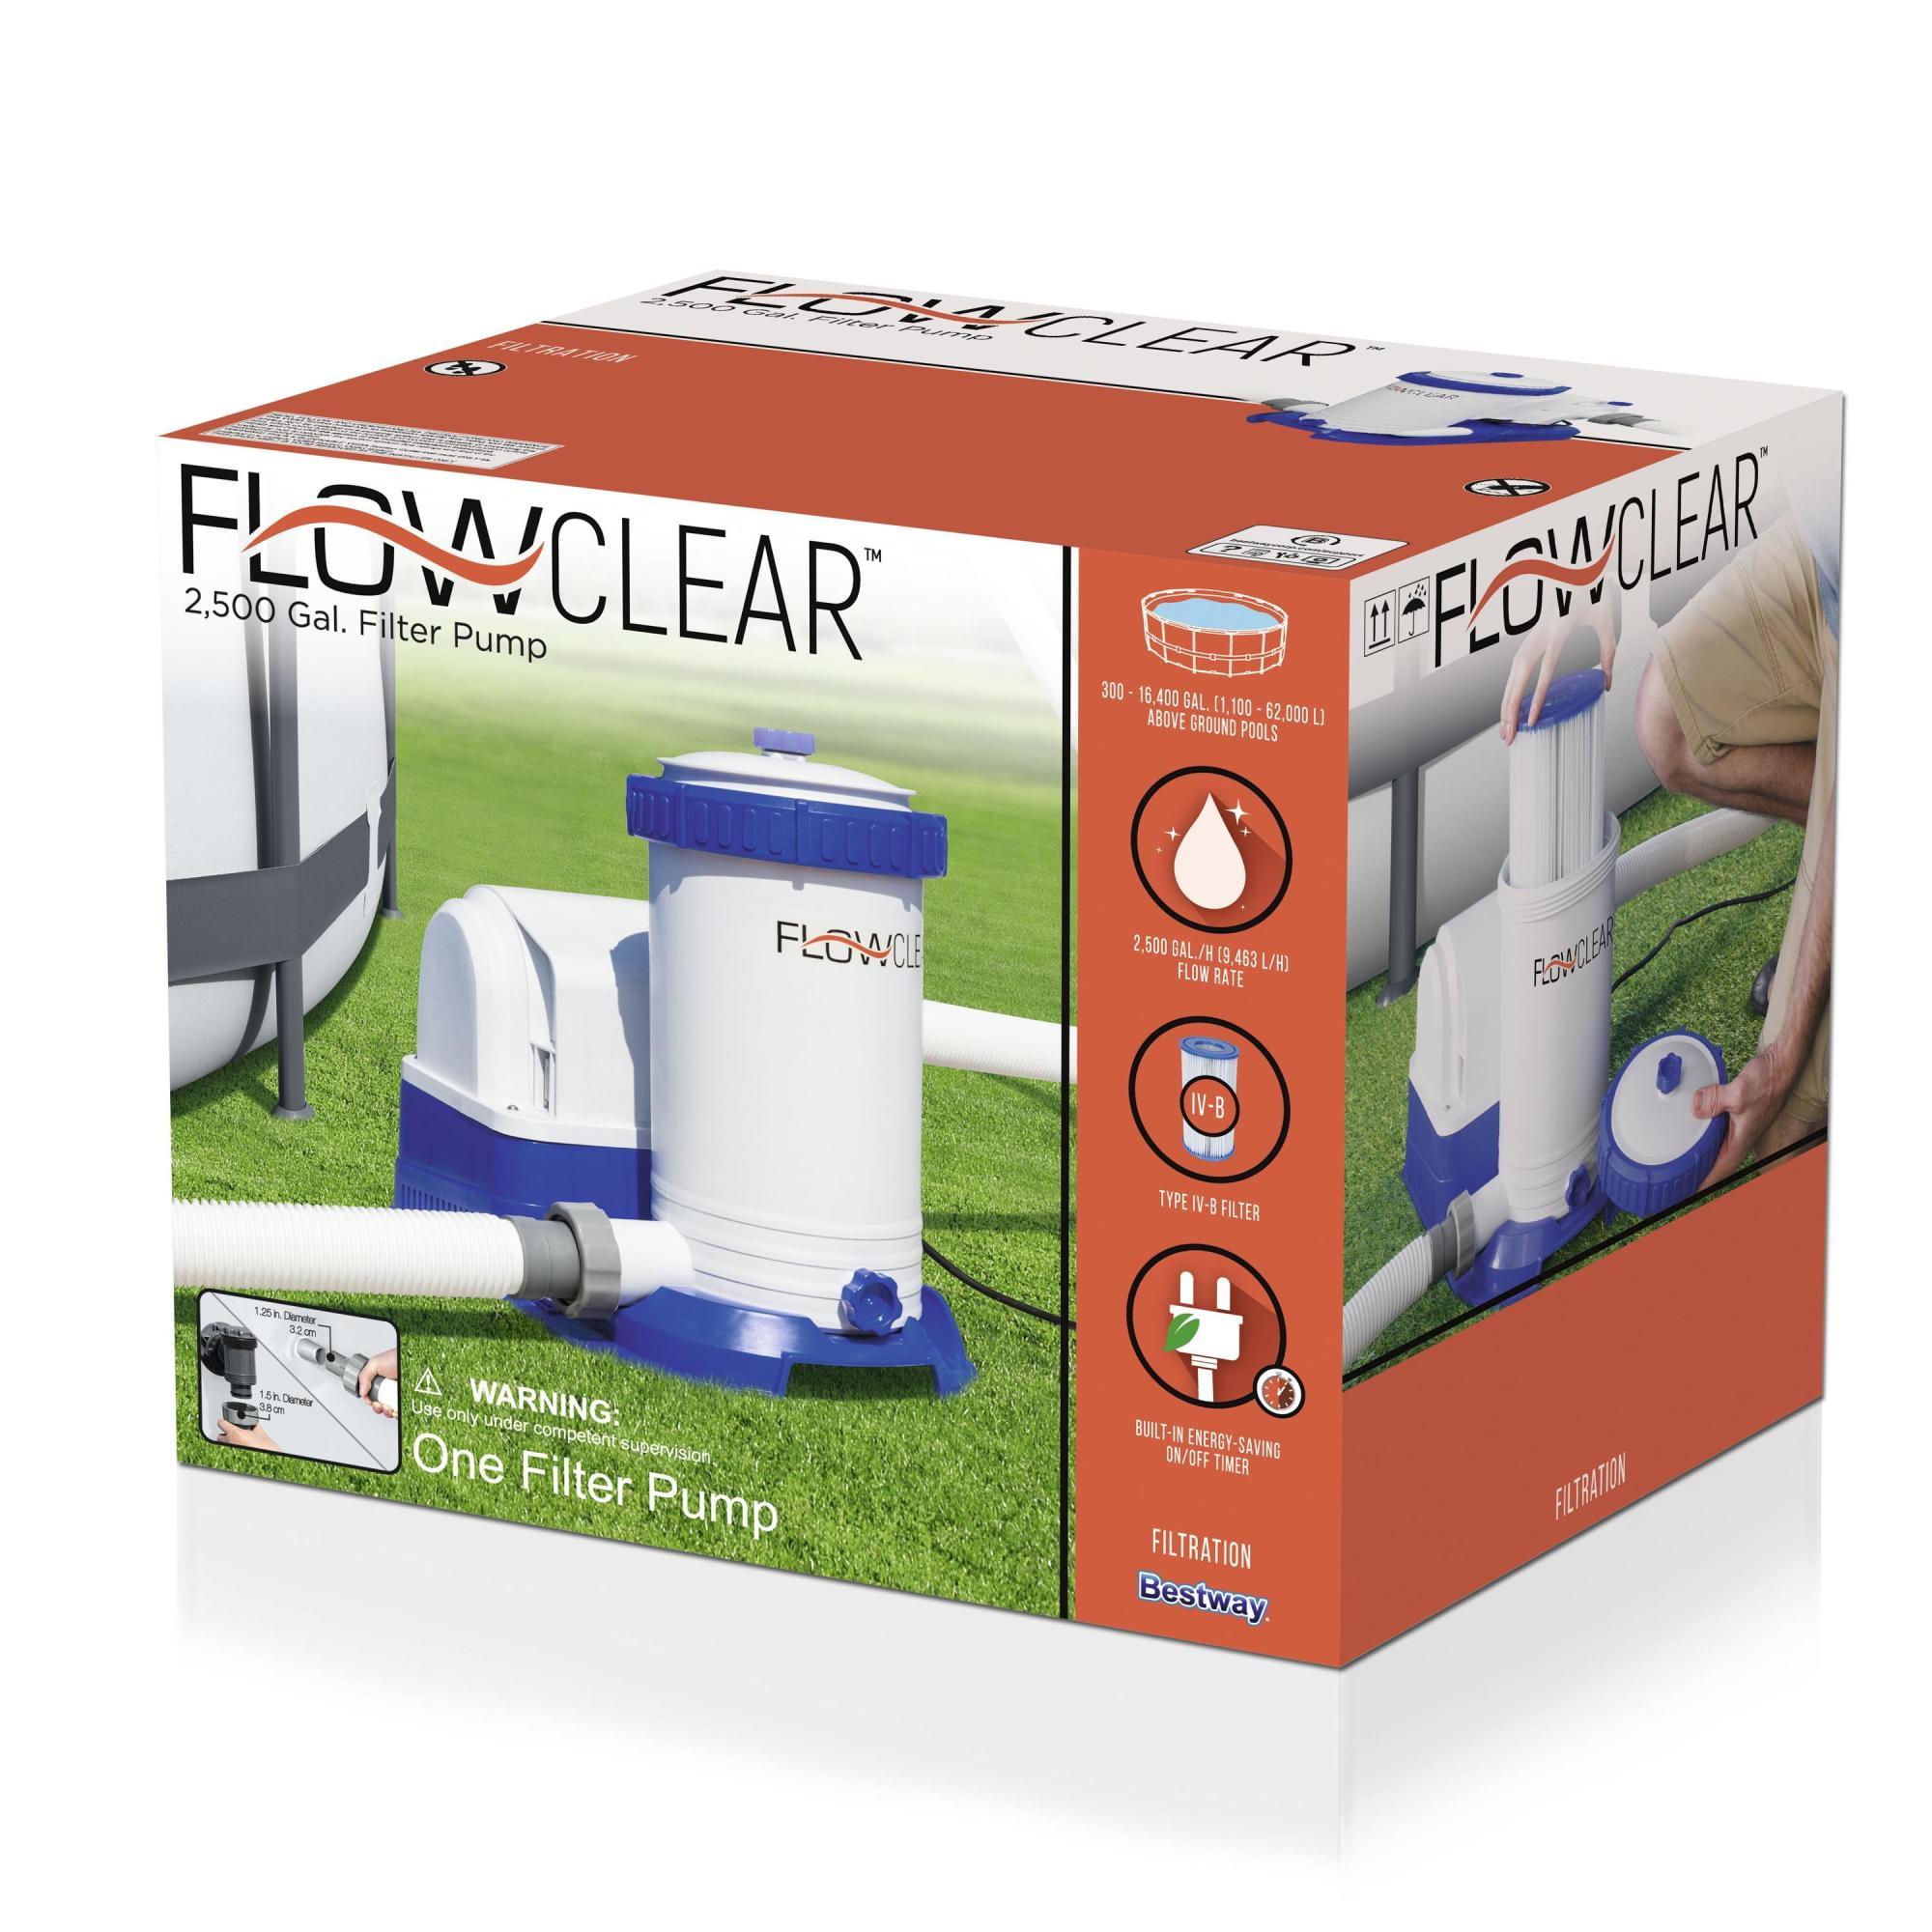 Water Filter GPH Flowclear Above 2500 58392E Bestway Pump Pool Ground